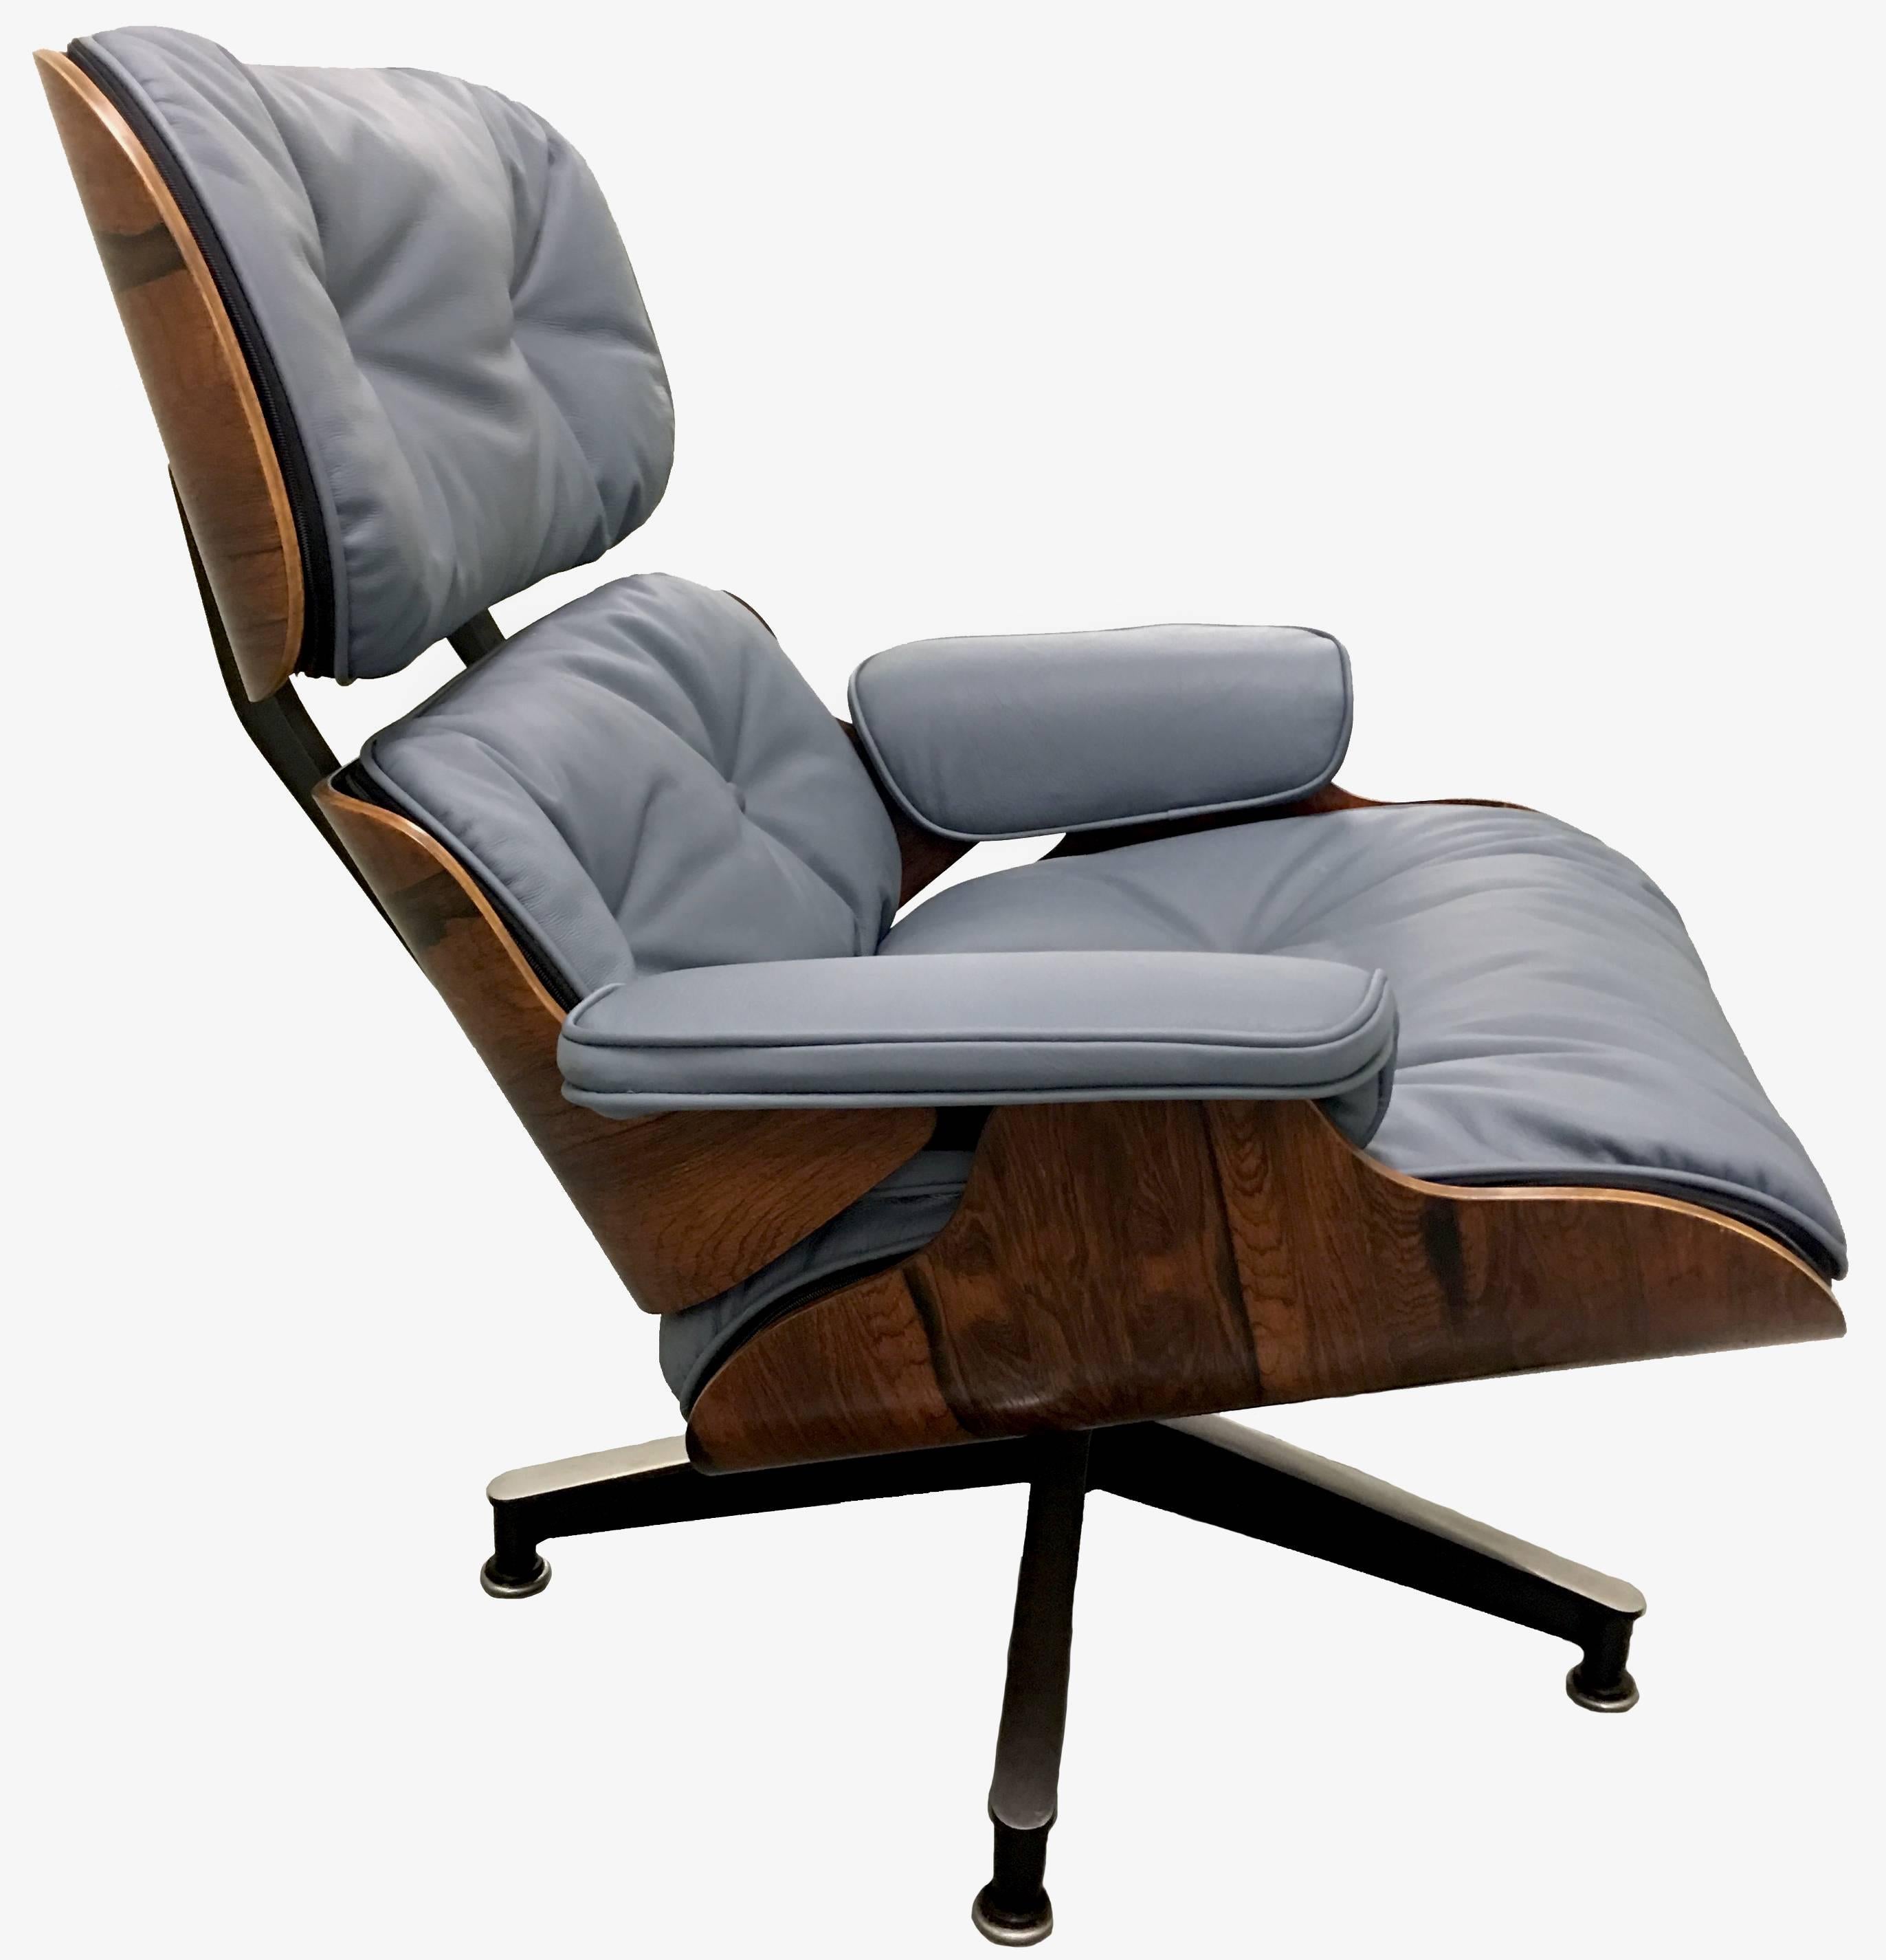 1968 Eames for Herman Miller rosewood 670 lounge chair and 671 ottoman. Newly upholstered in royal hide 'Deep Space' (grey) by Edelman Leather. The set is in mint condition and the chair retains original labels. 

Measures: Chair 32